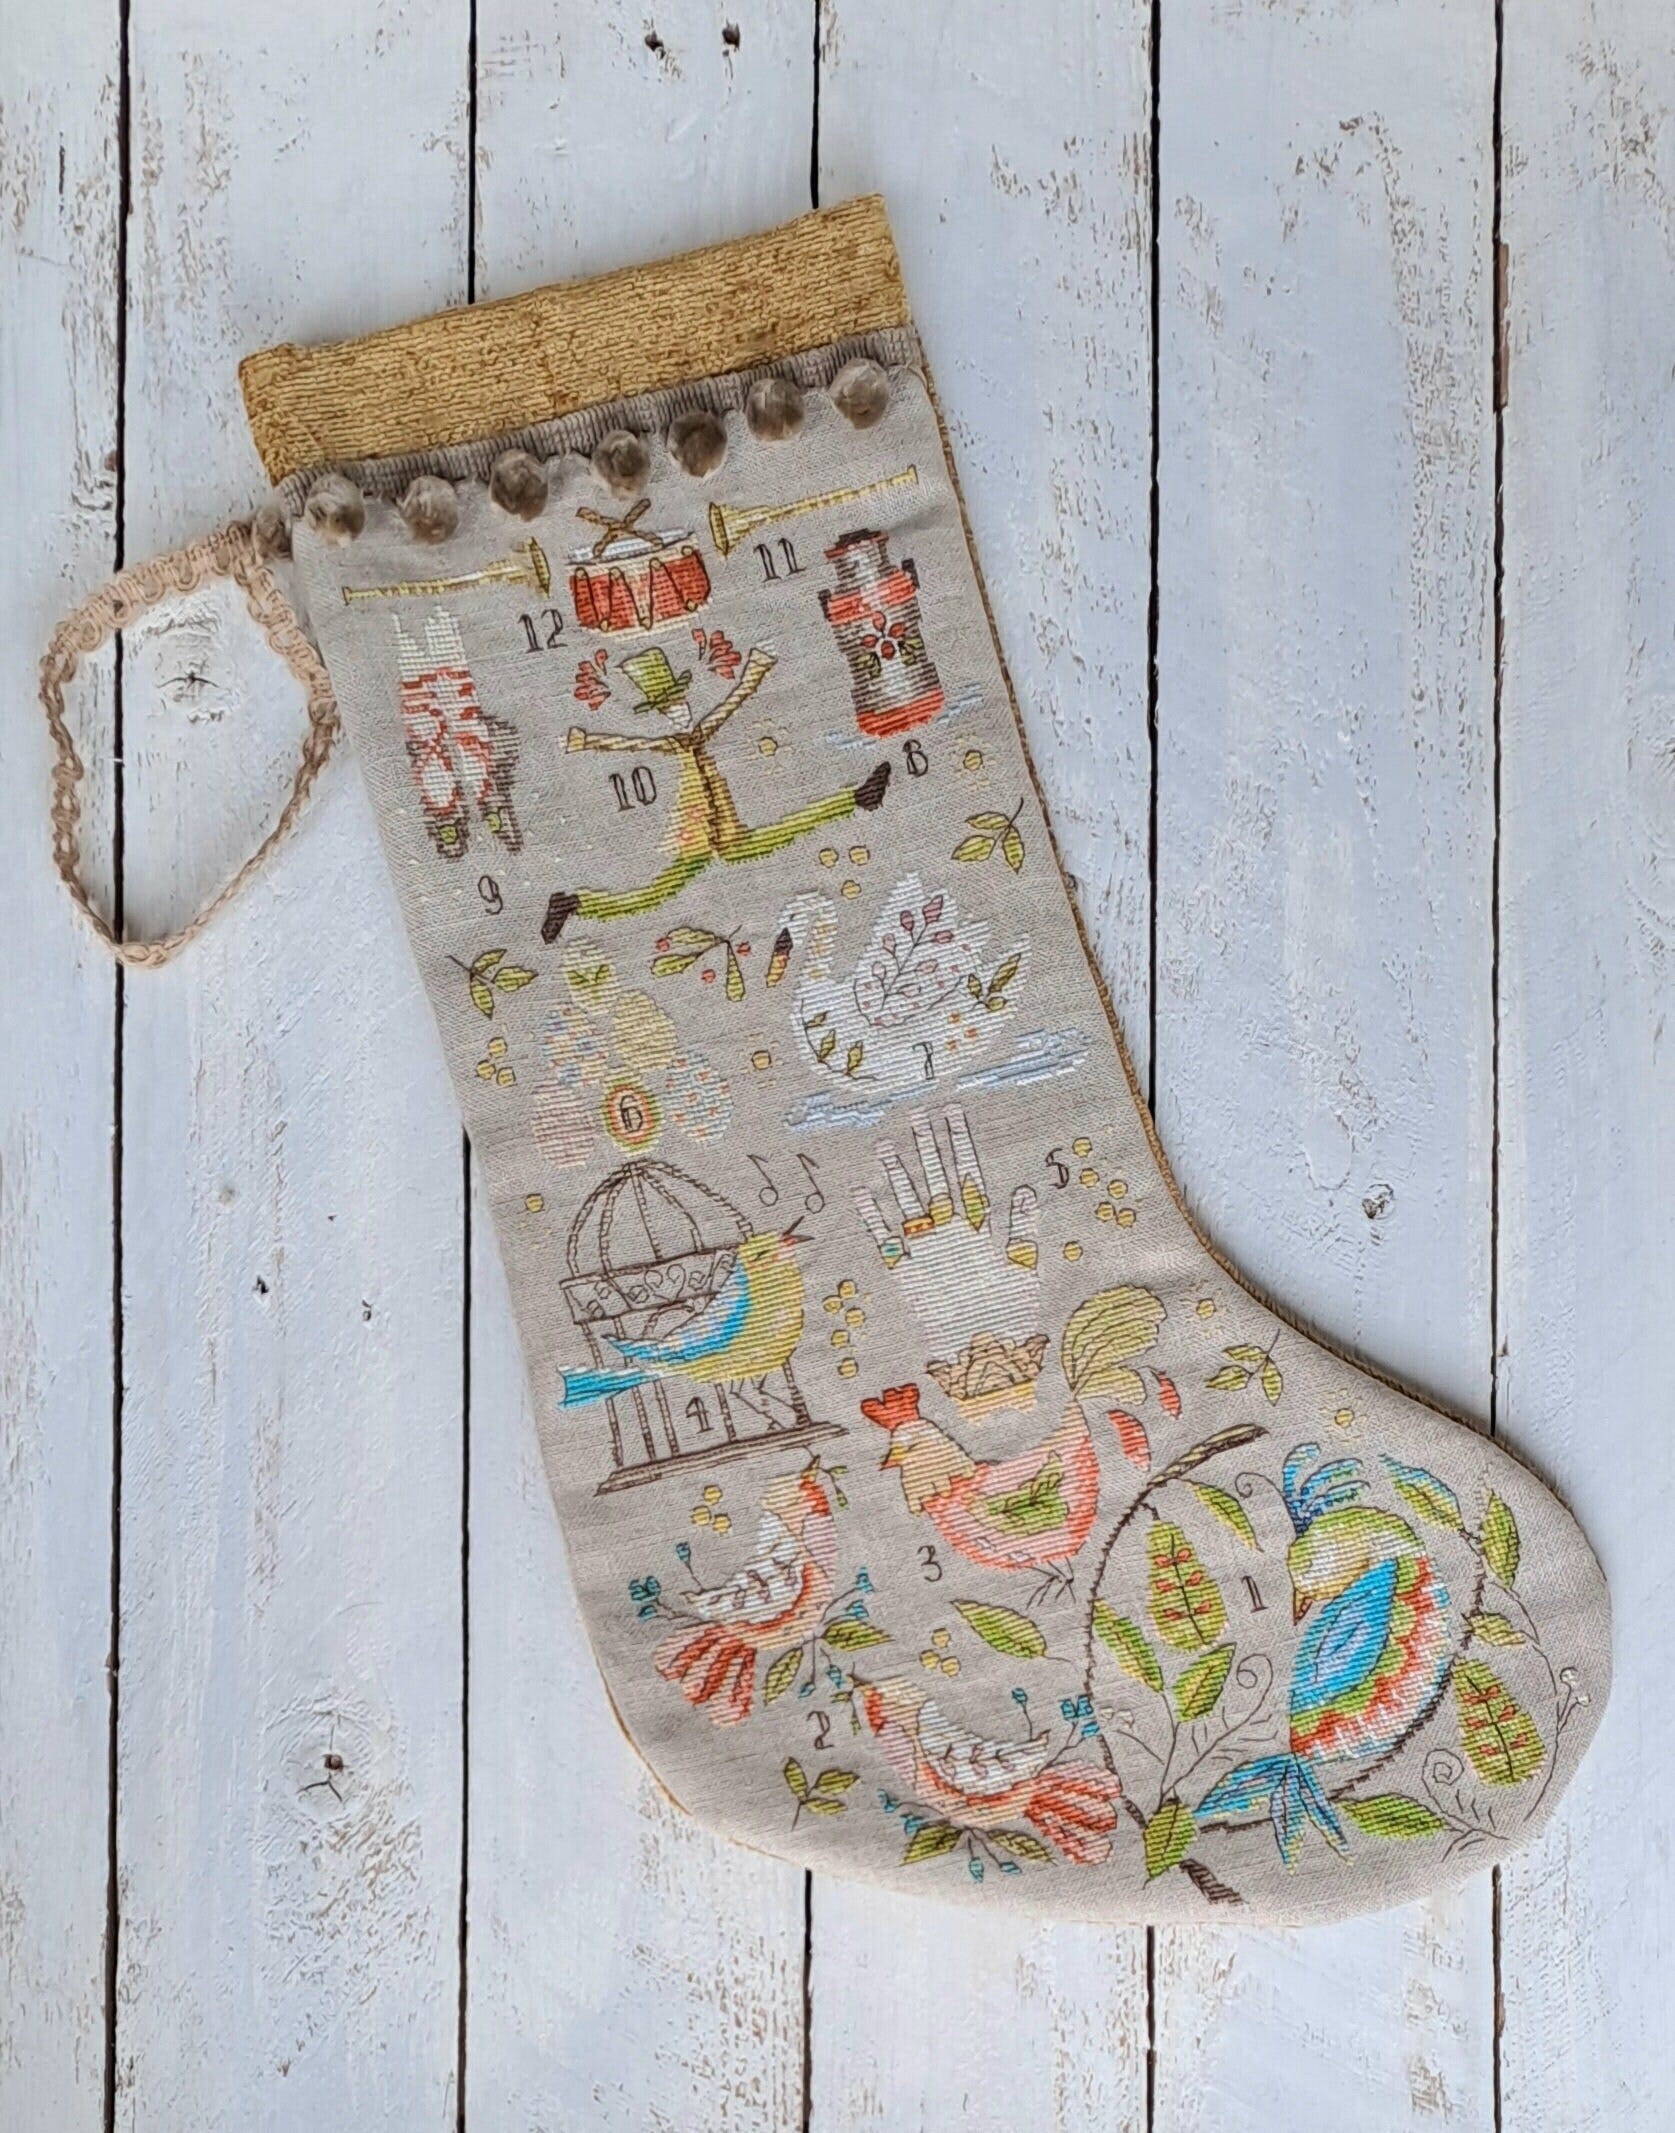 12 DAYS of CHRISTMAS Stocking.  PDF Cross stitch chart / pattern - Instant download.